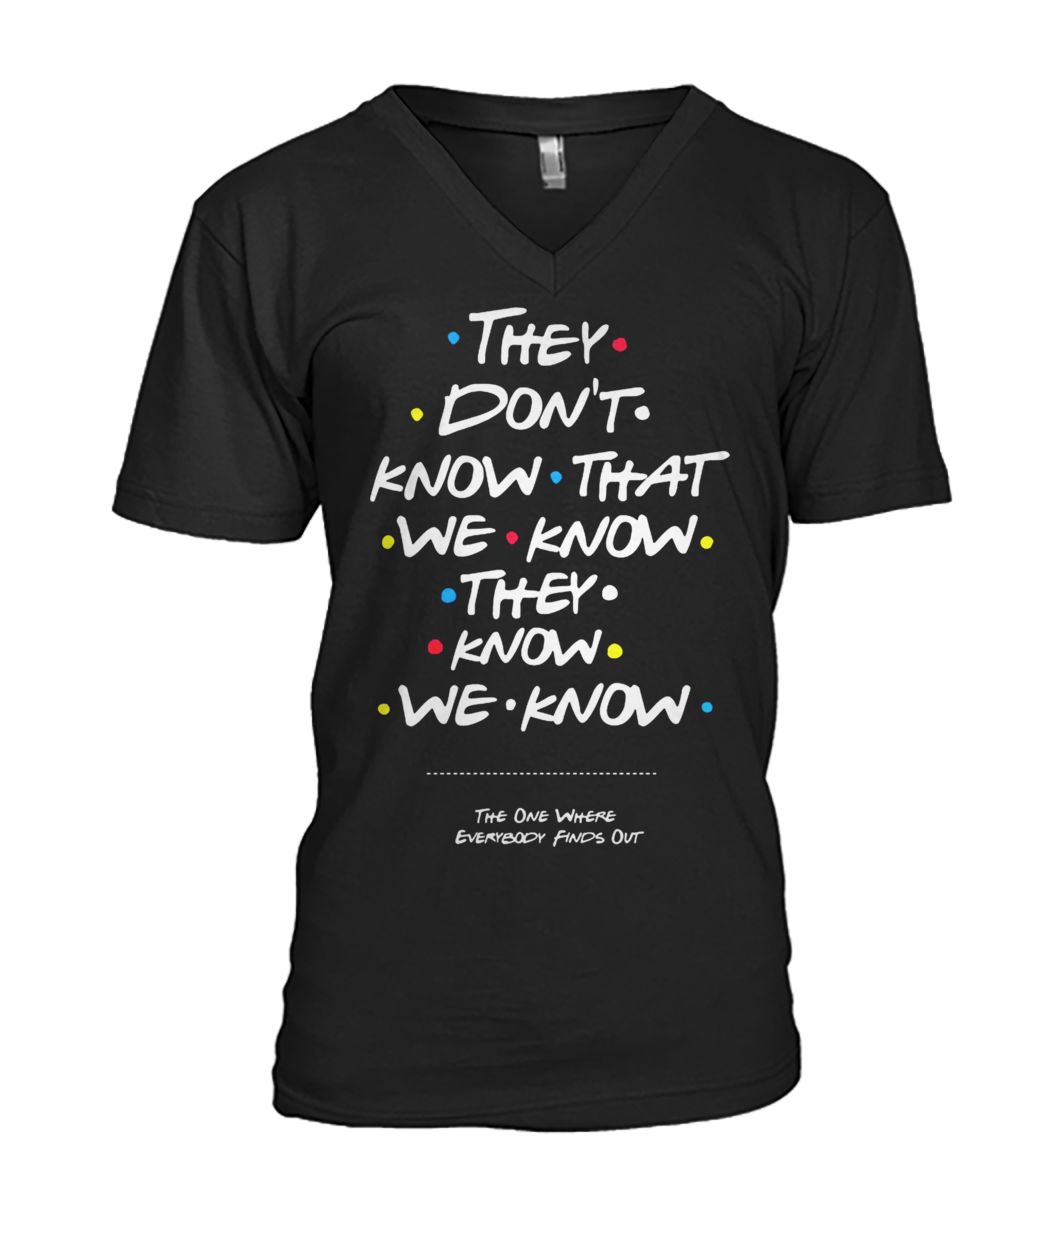 Friends tv show they don't know that we know they know we know mens v-neck